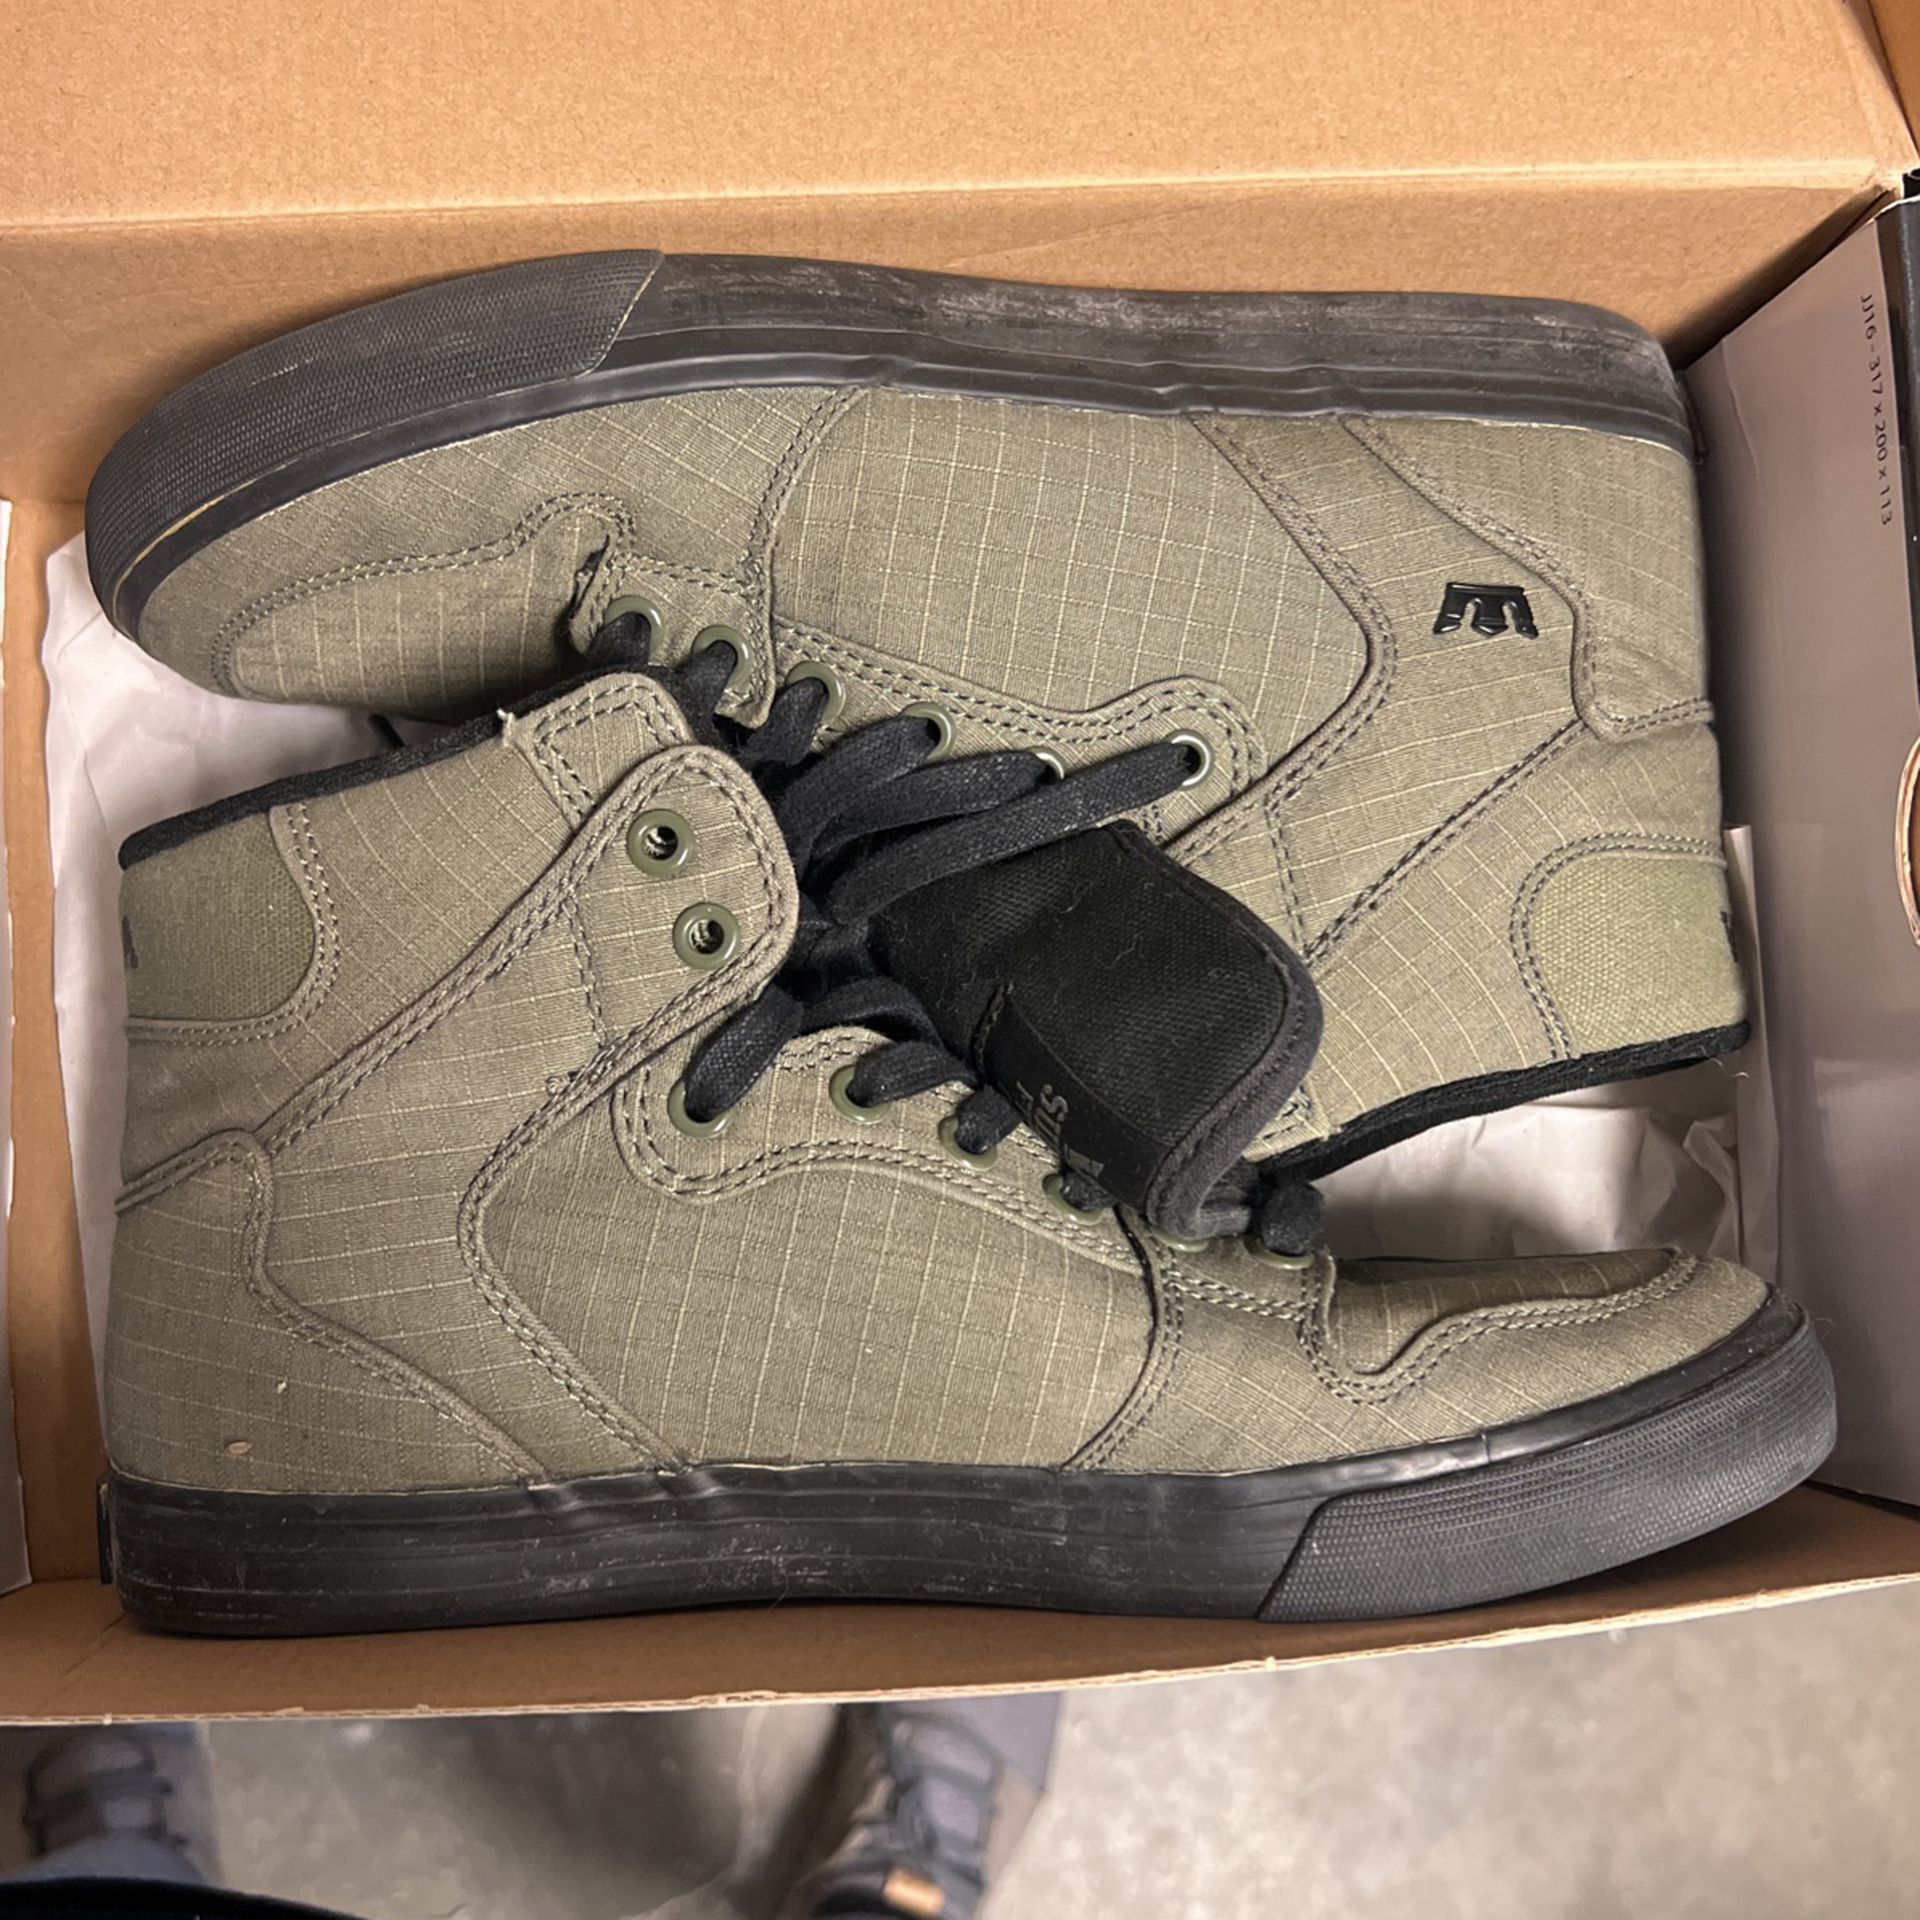 Green High Top Supras for Sale in Corona, CA - OfferUp